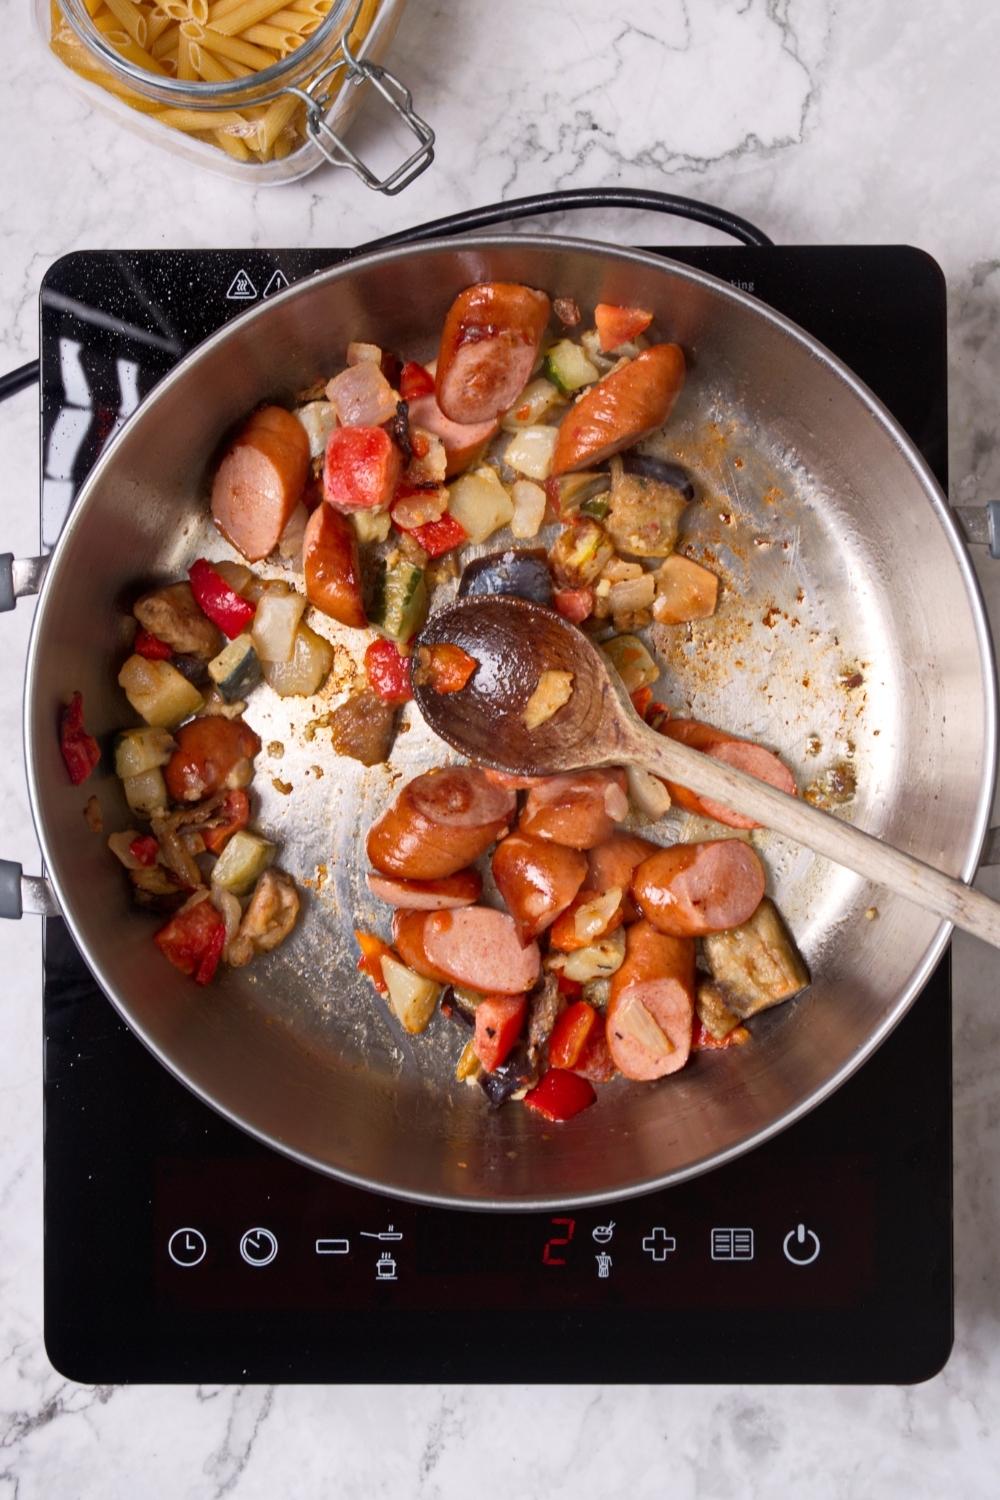 An overhead view of a cooking pan cooking mixed veggies and chunks of sausage.